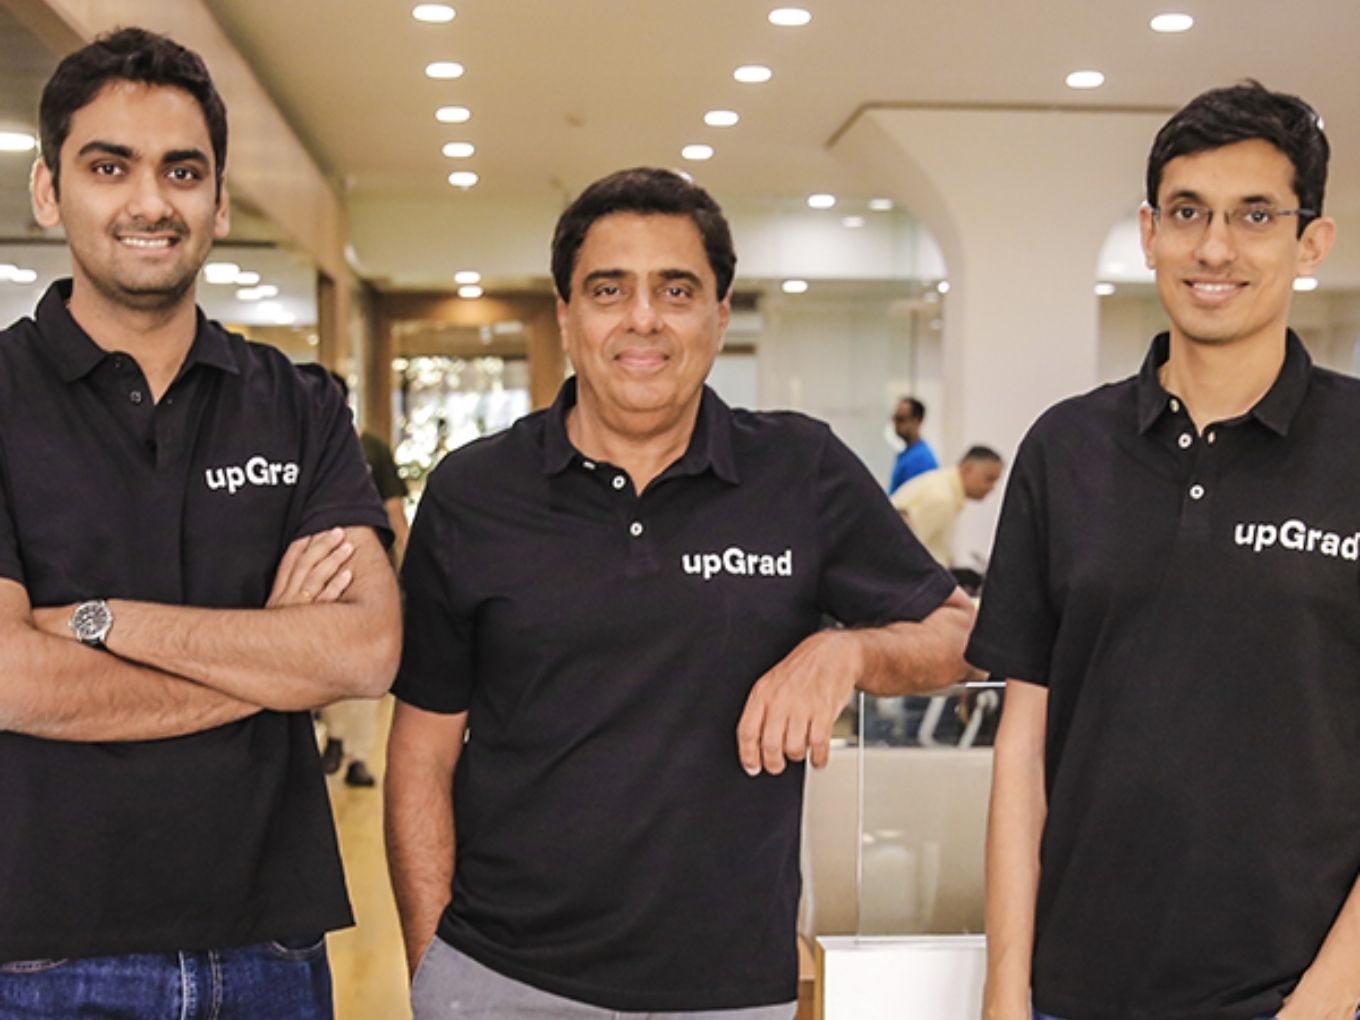 upGrad Acquires Recruitment Startup Rekrut To Add Career Counselling, Placements